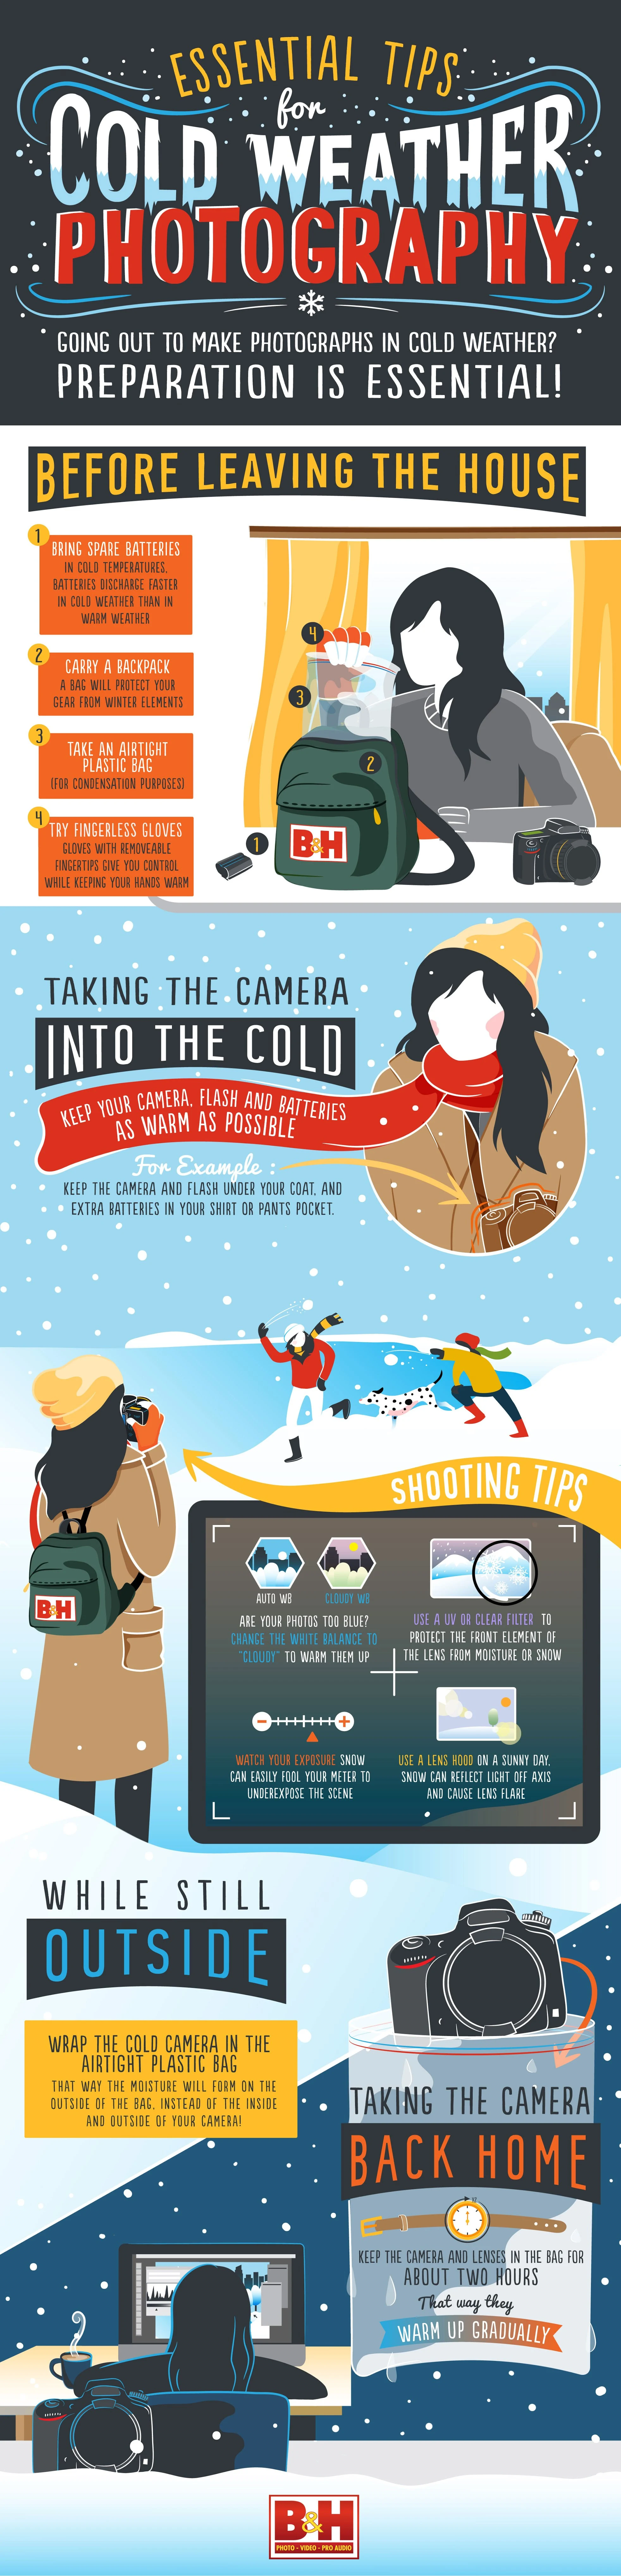 Essential Tips for Cold-Weather Photography - #infographic